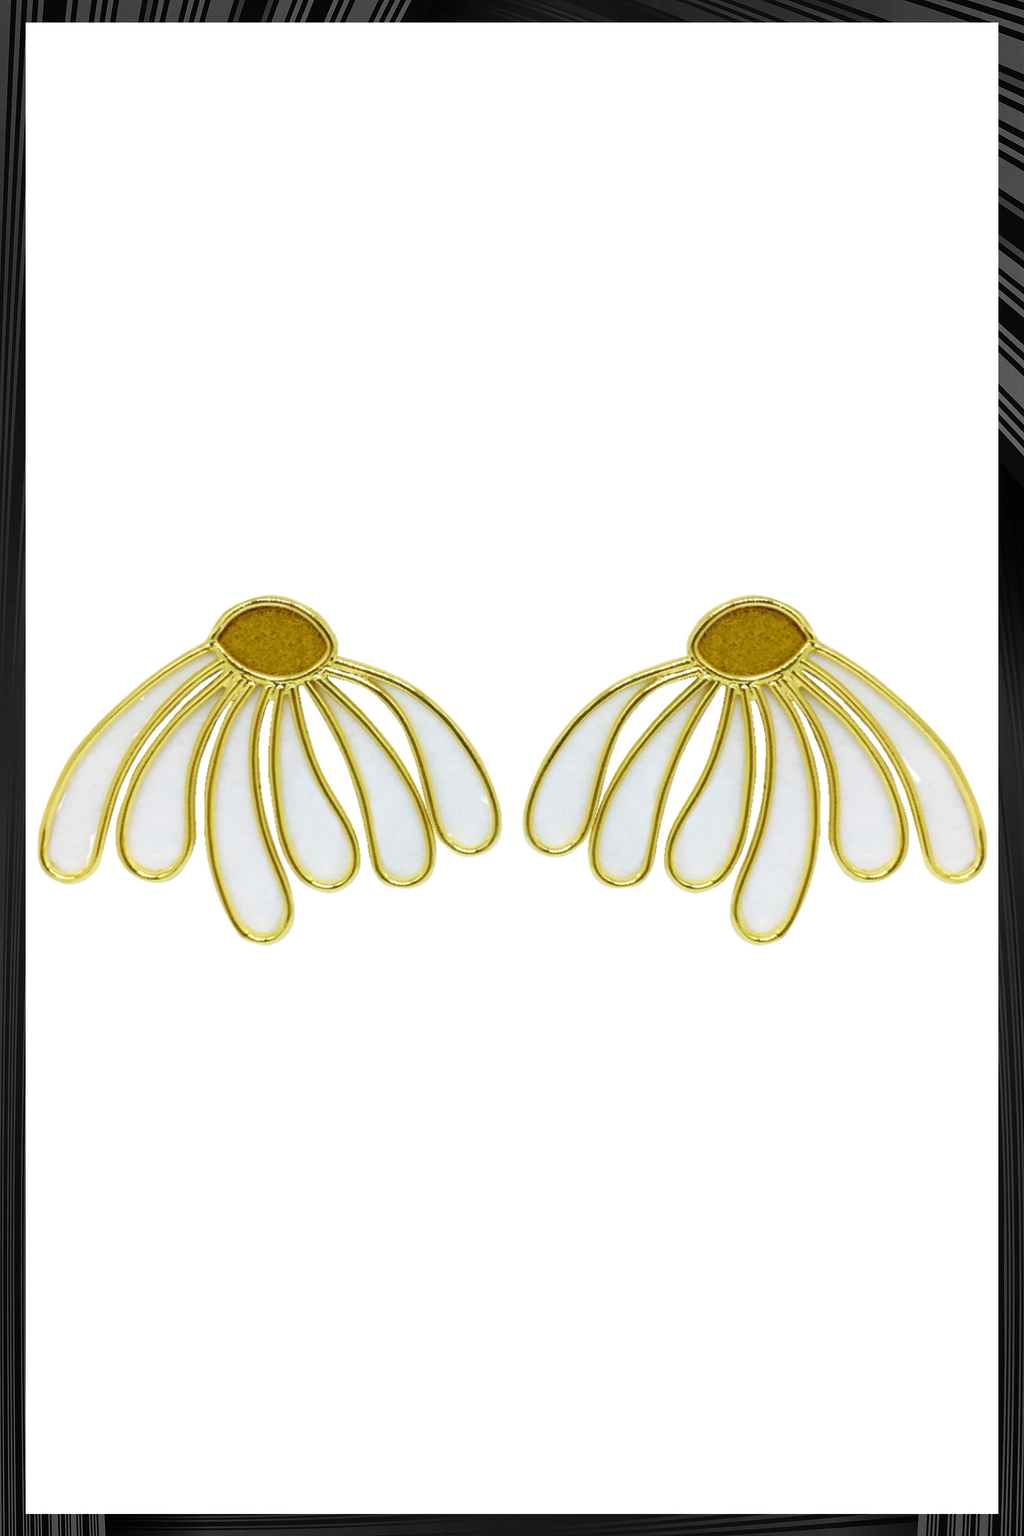 White Margarita Earrings | Free Delivery - 3 Week Shipping